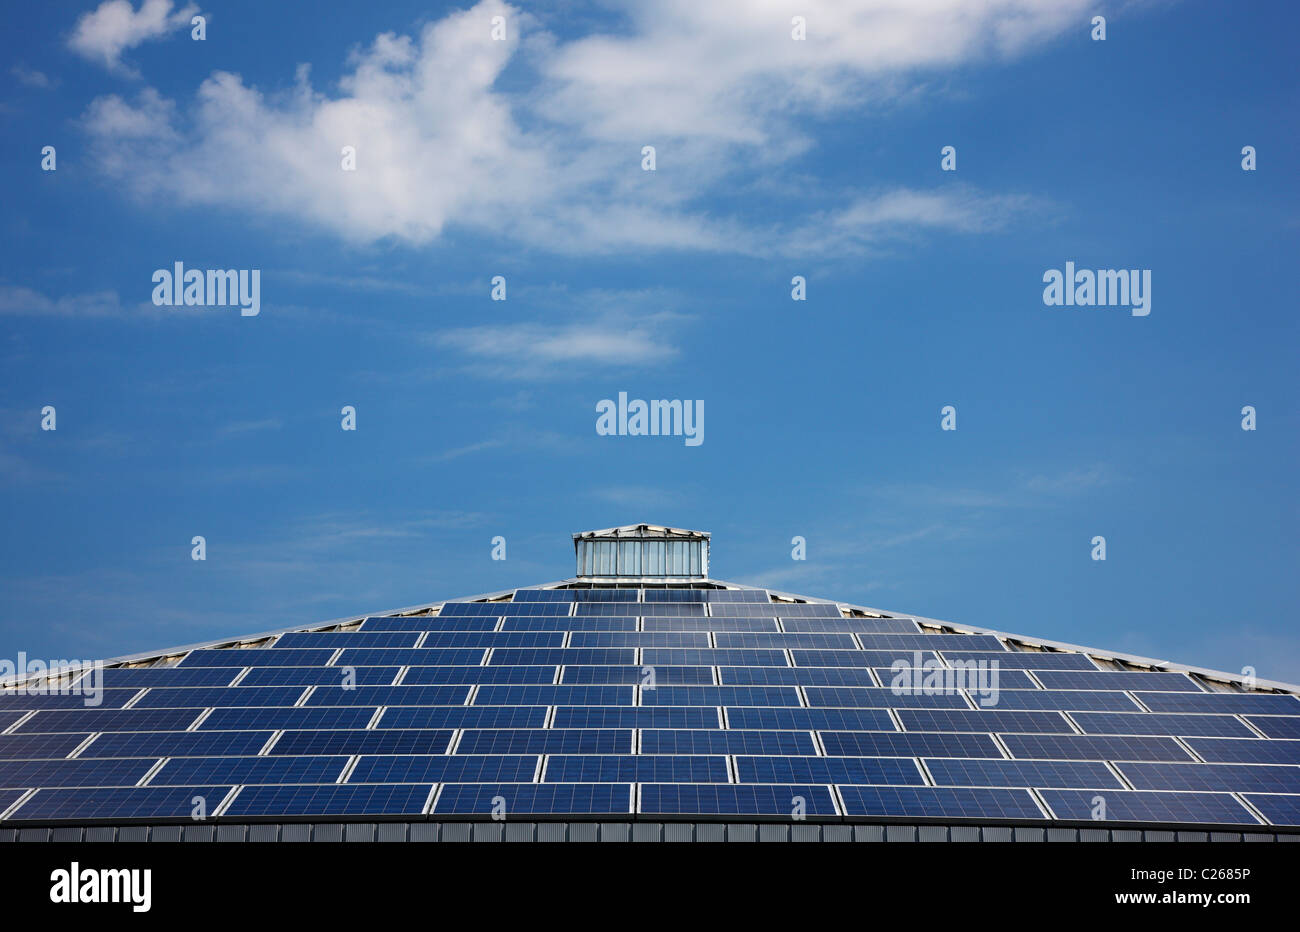 Roof of a building with solar energy panels. Blue sky, pyramid design. Germany. Stock Photo